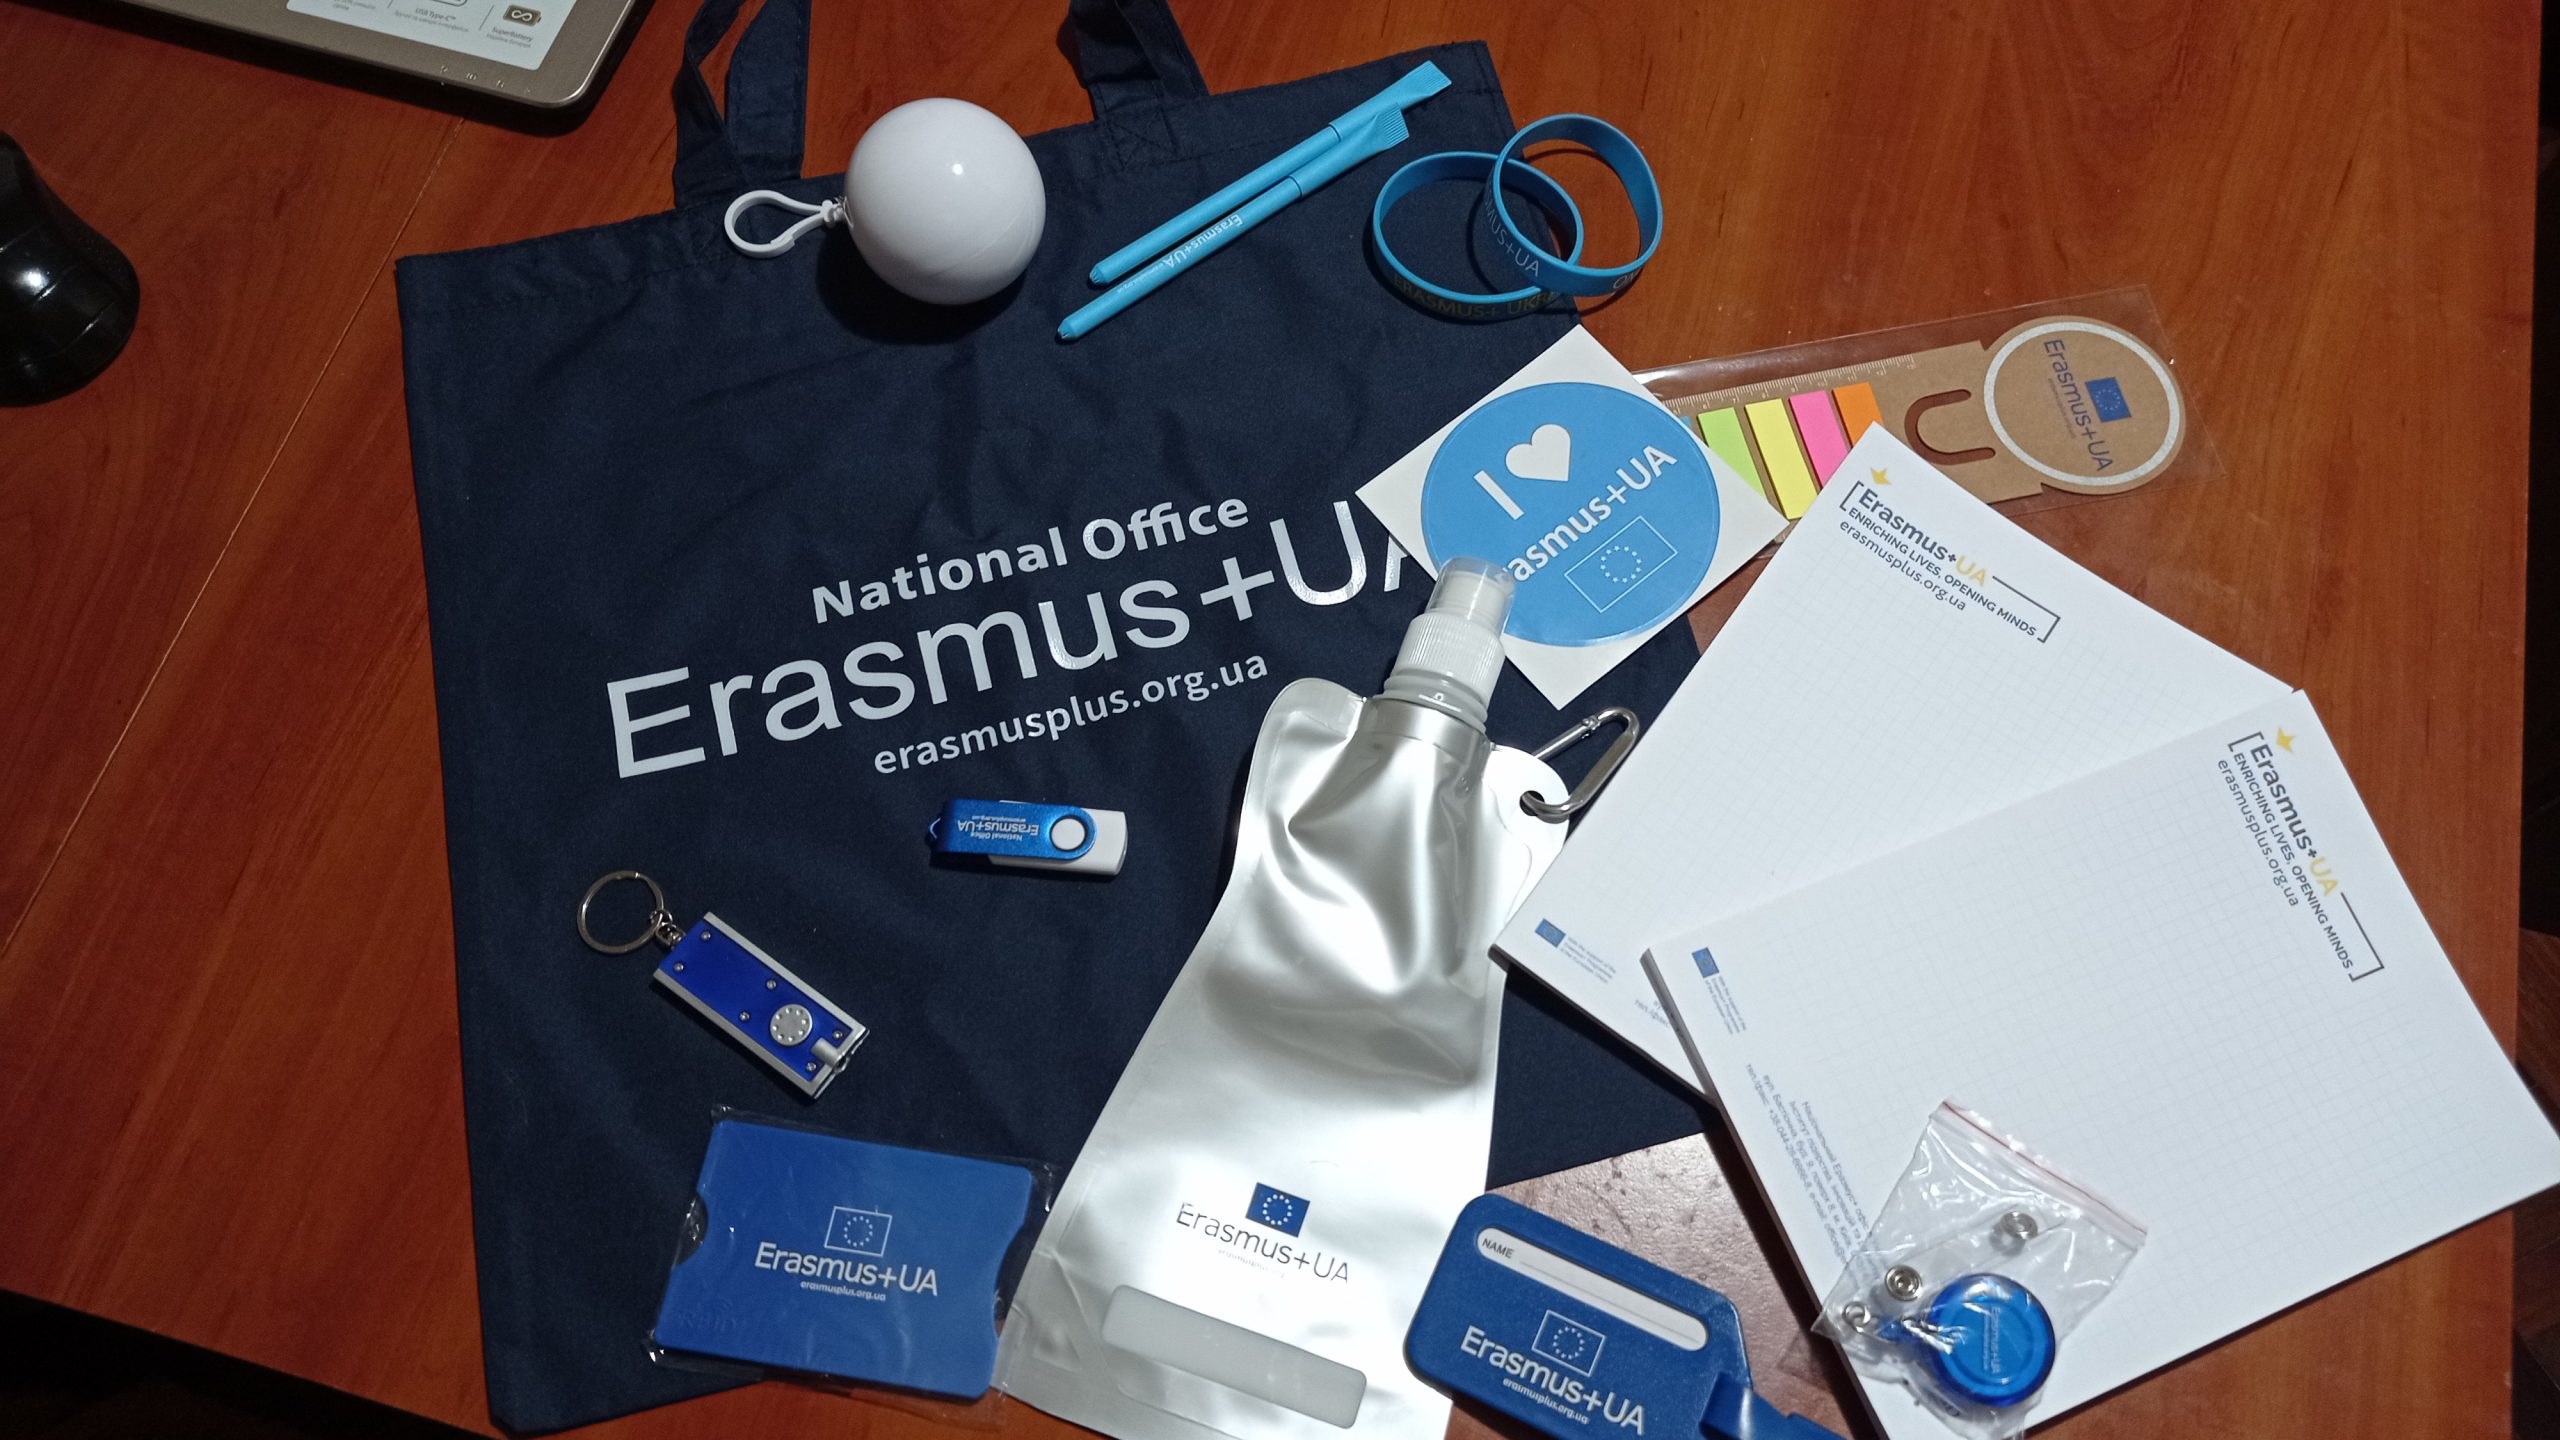 And again gifts from the National Erasmus+ office!